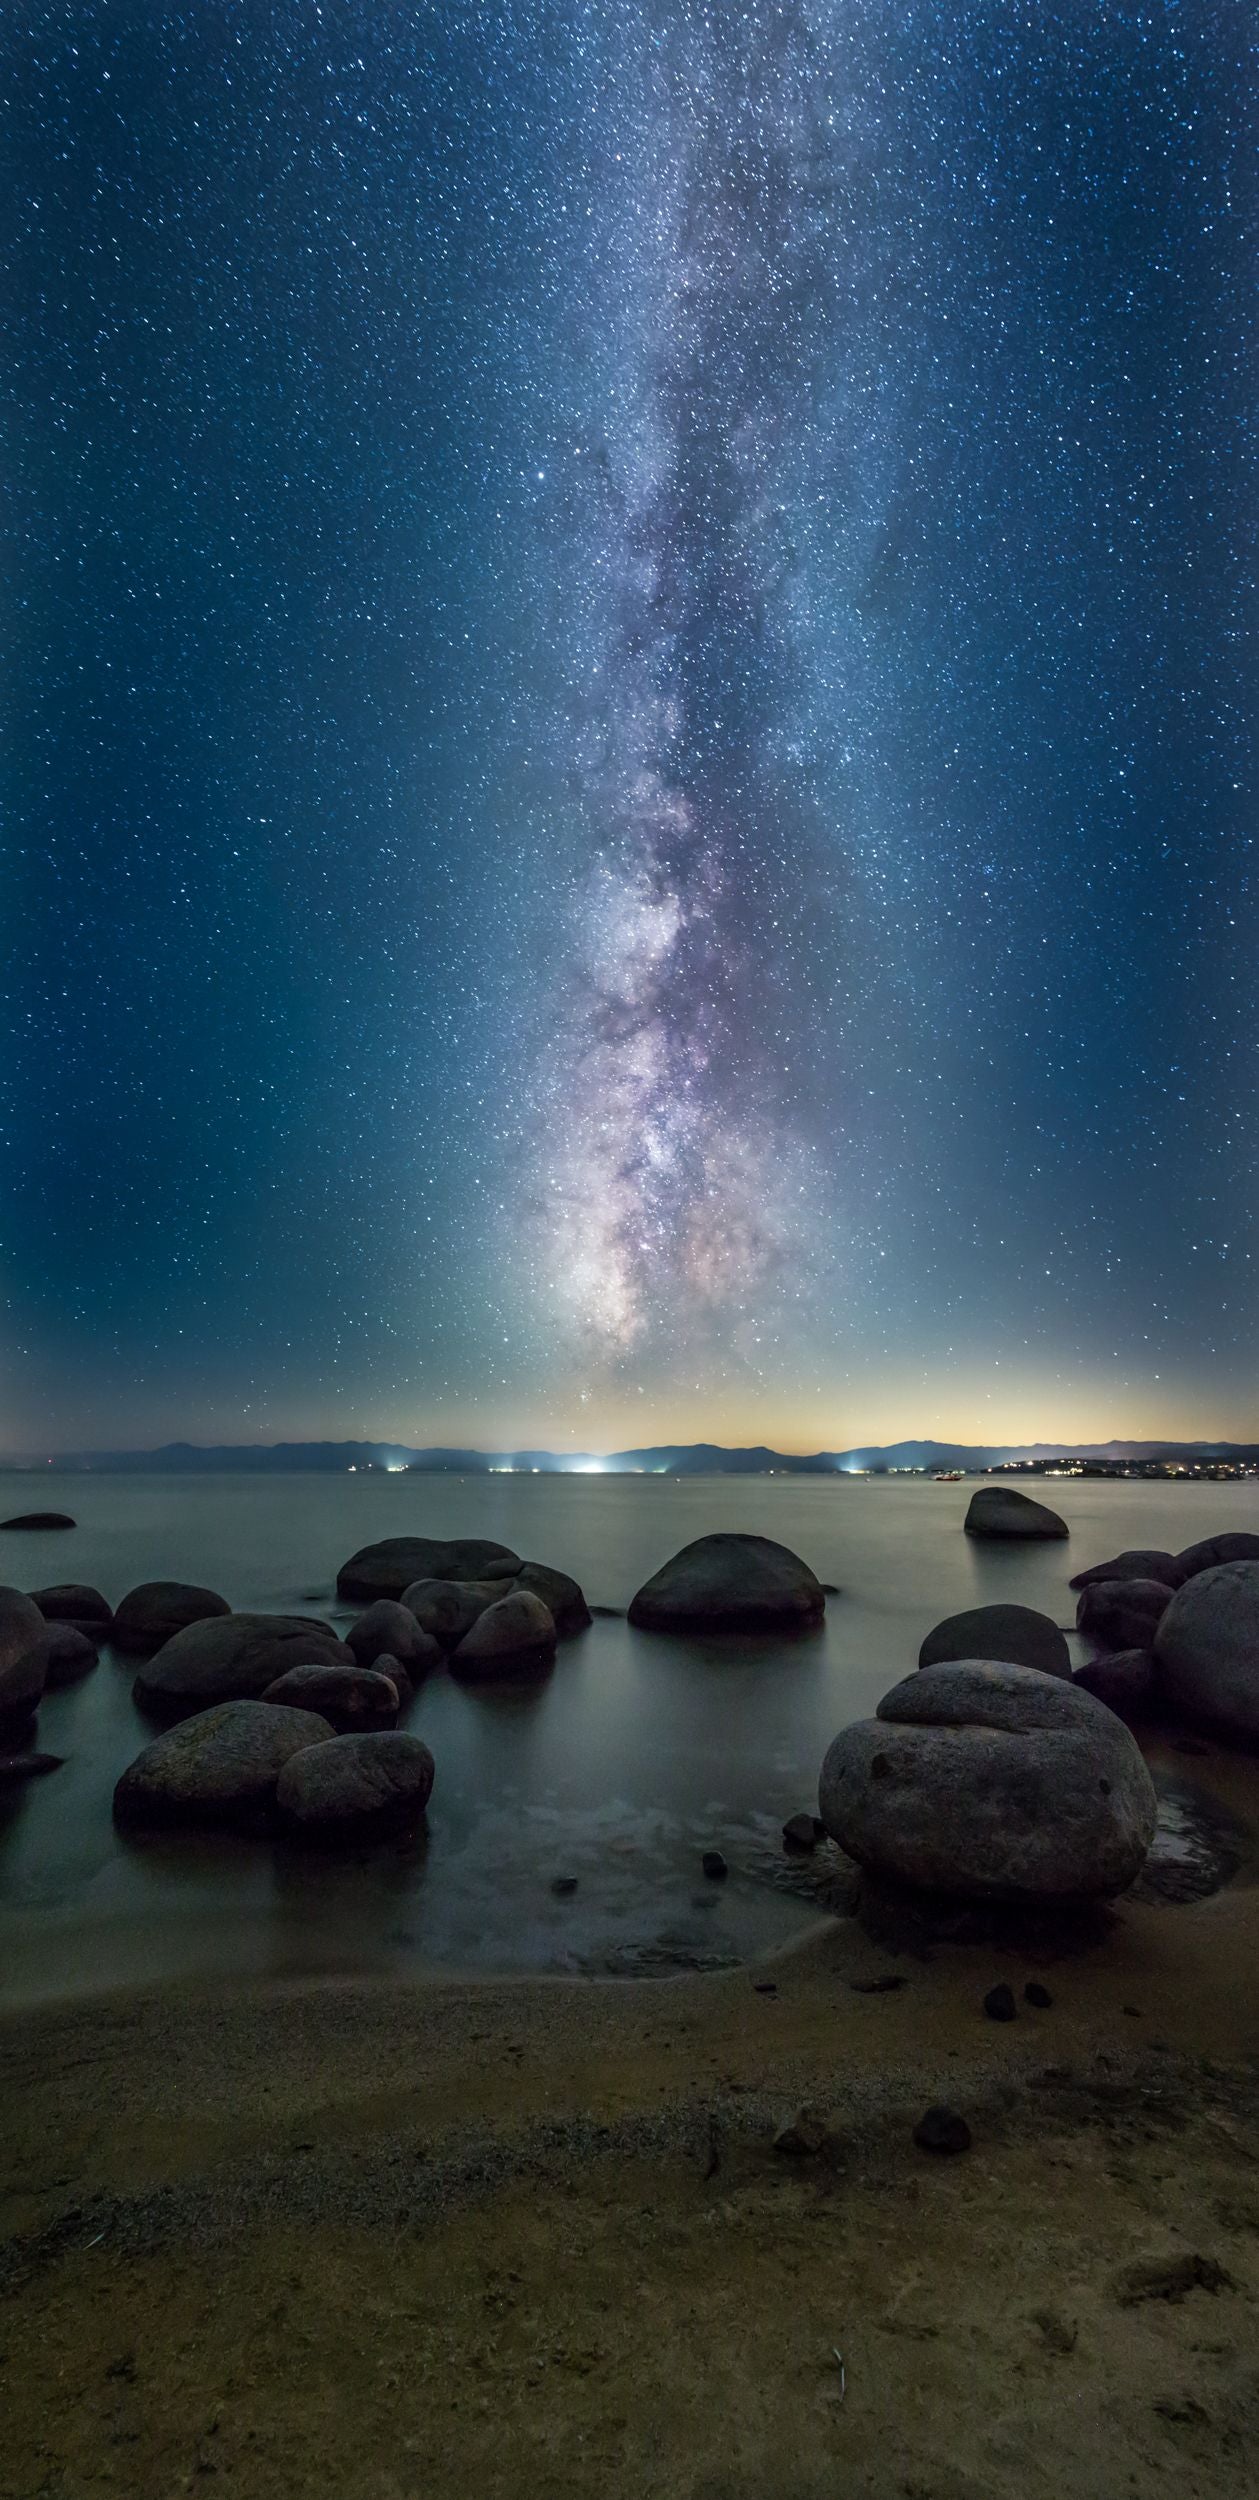 The Milky Way above a sandy beach on Lake Tahoe.